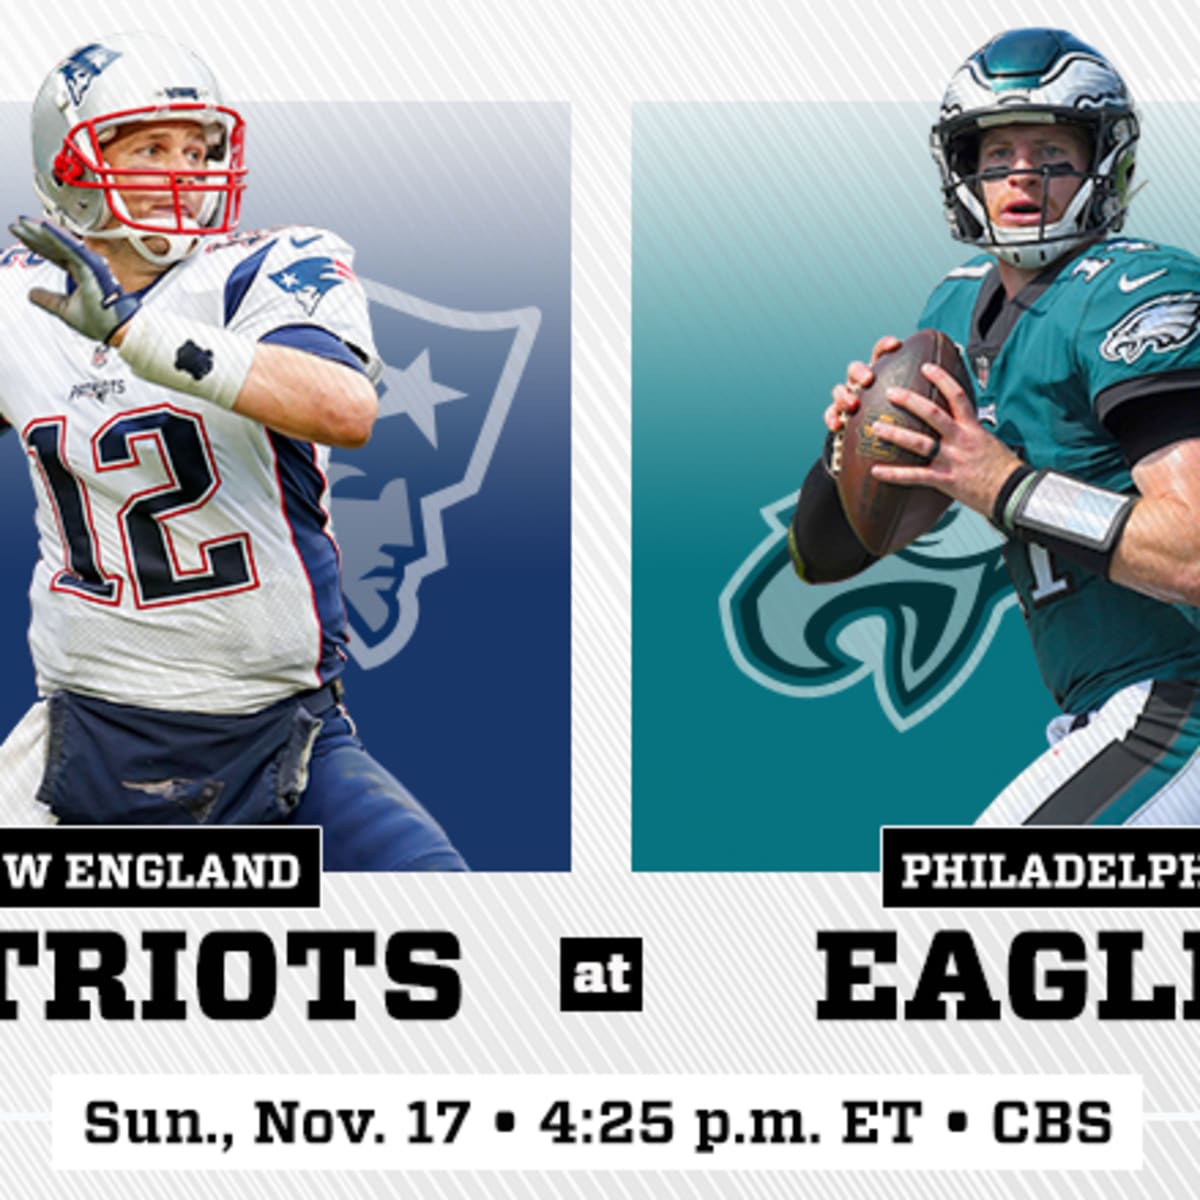 Patriots vs. Eagles: Preview, prediction, players to watch